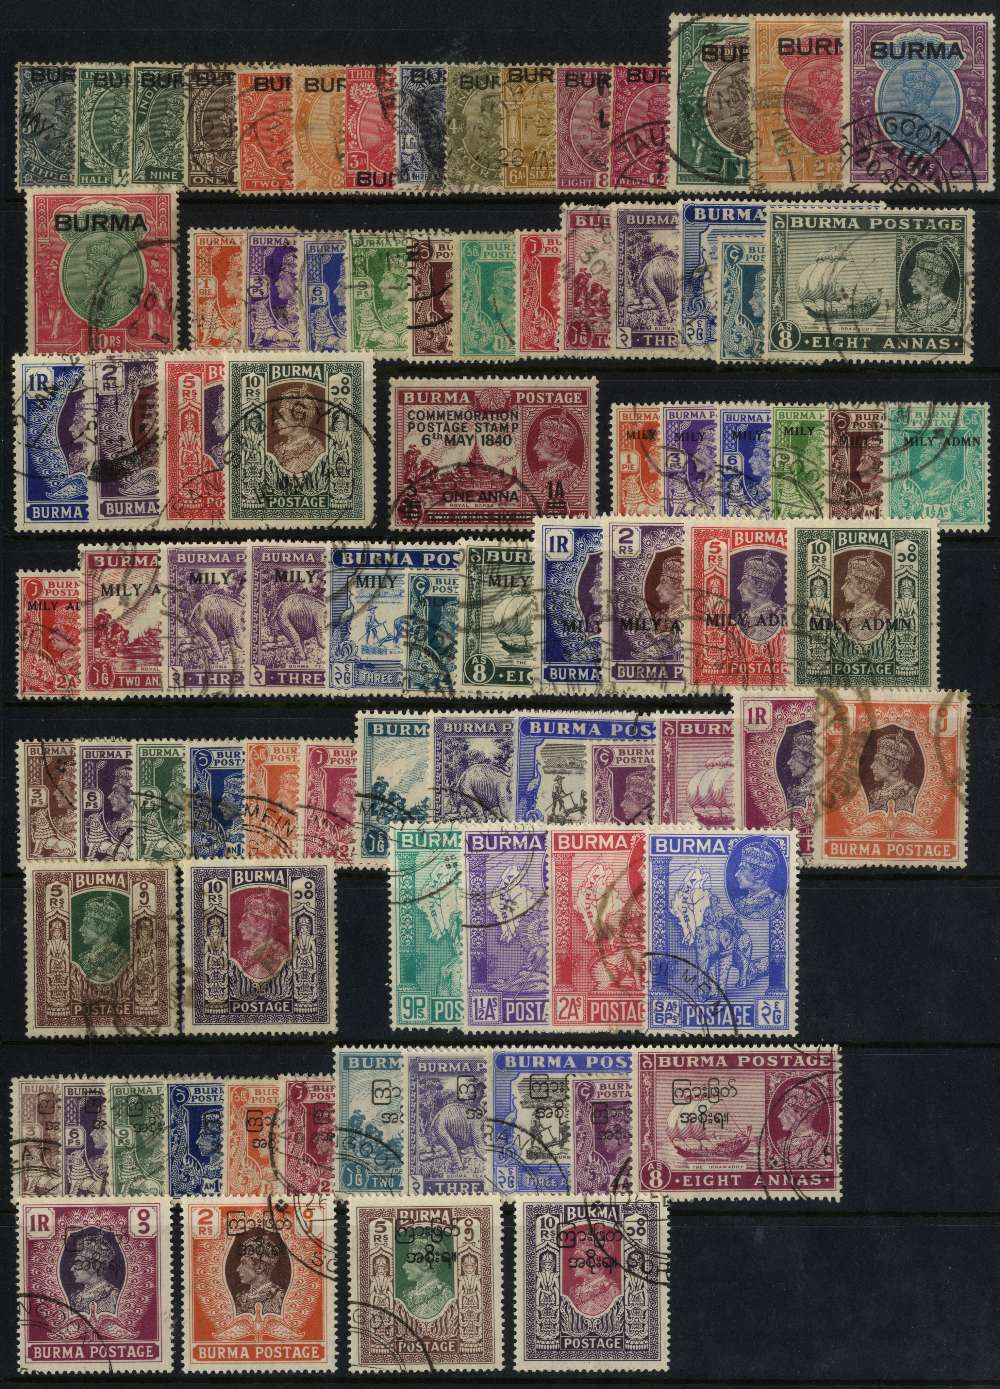 Burma - 1937-47 Postage issues used collection (84) with 1937 set to 10r, couple of telegraphic